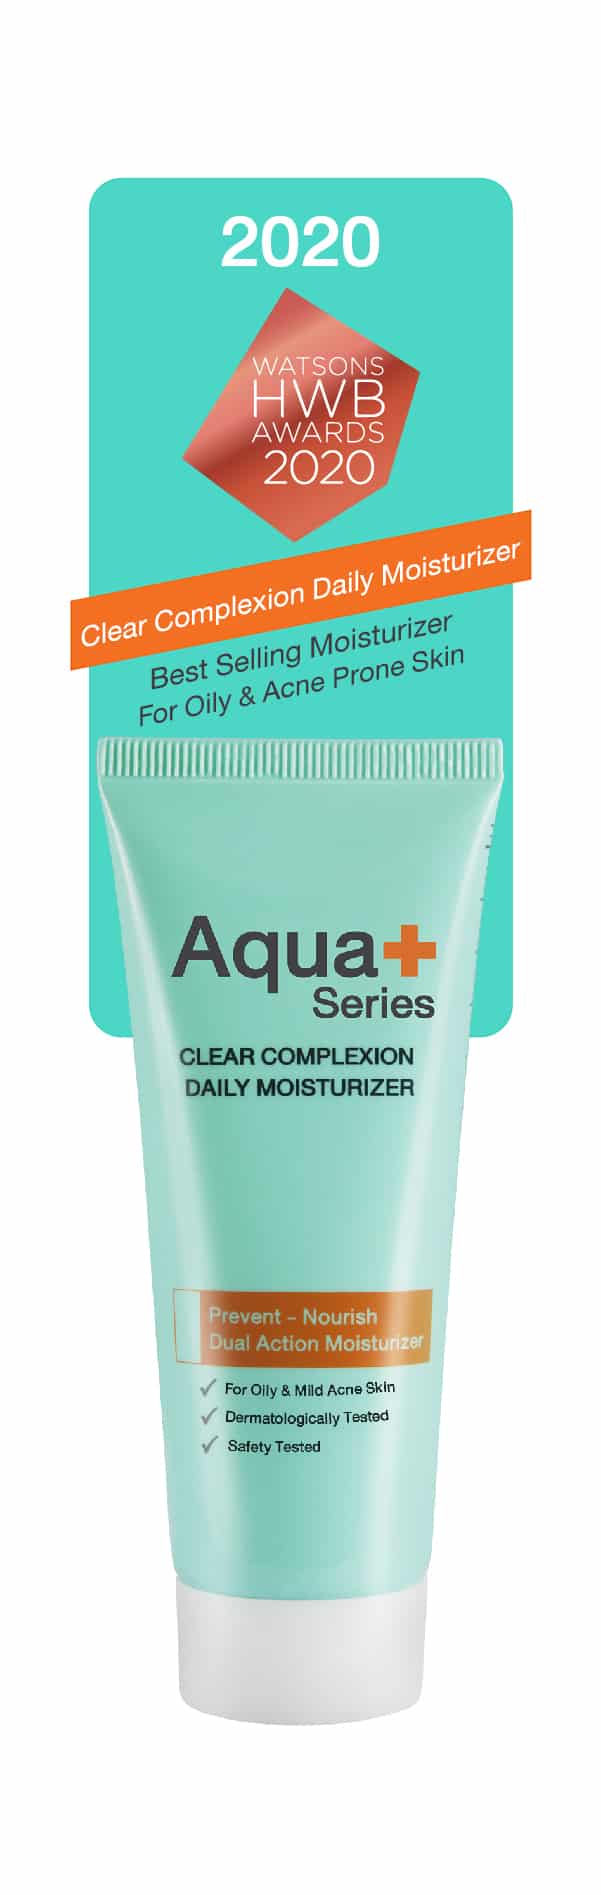 Clear Complexion Daily Moisturizer